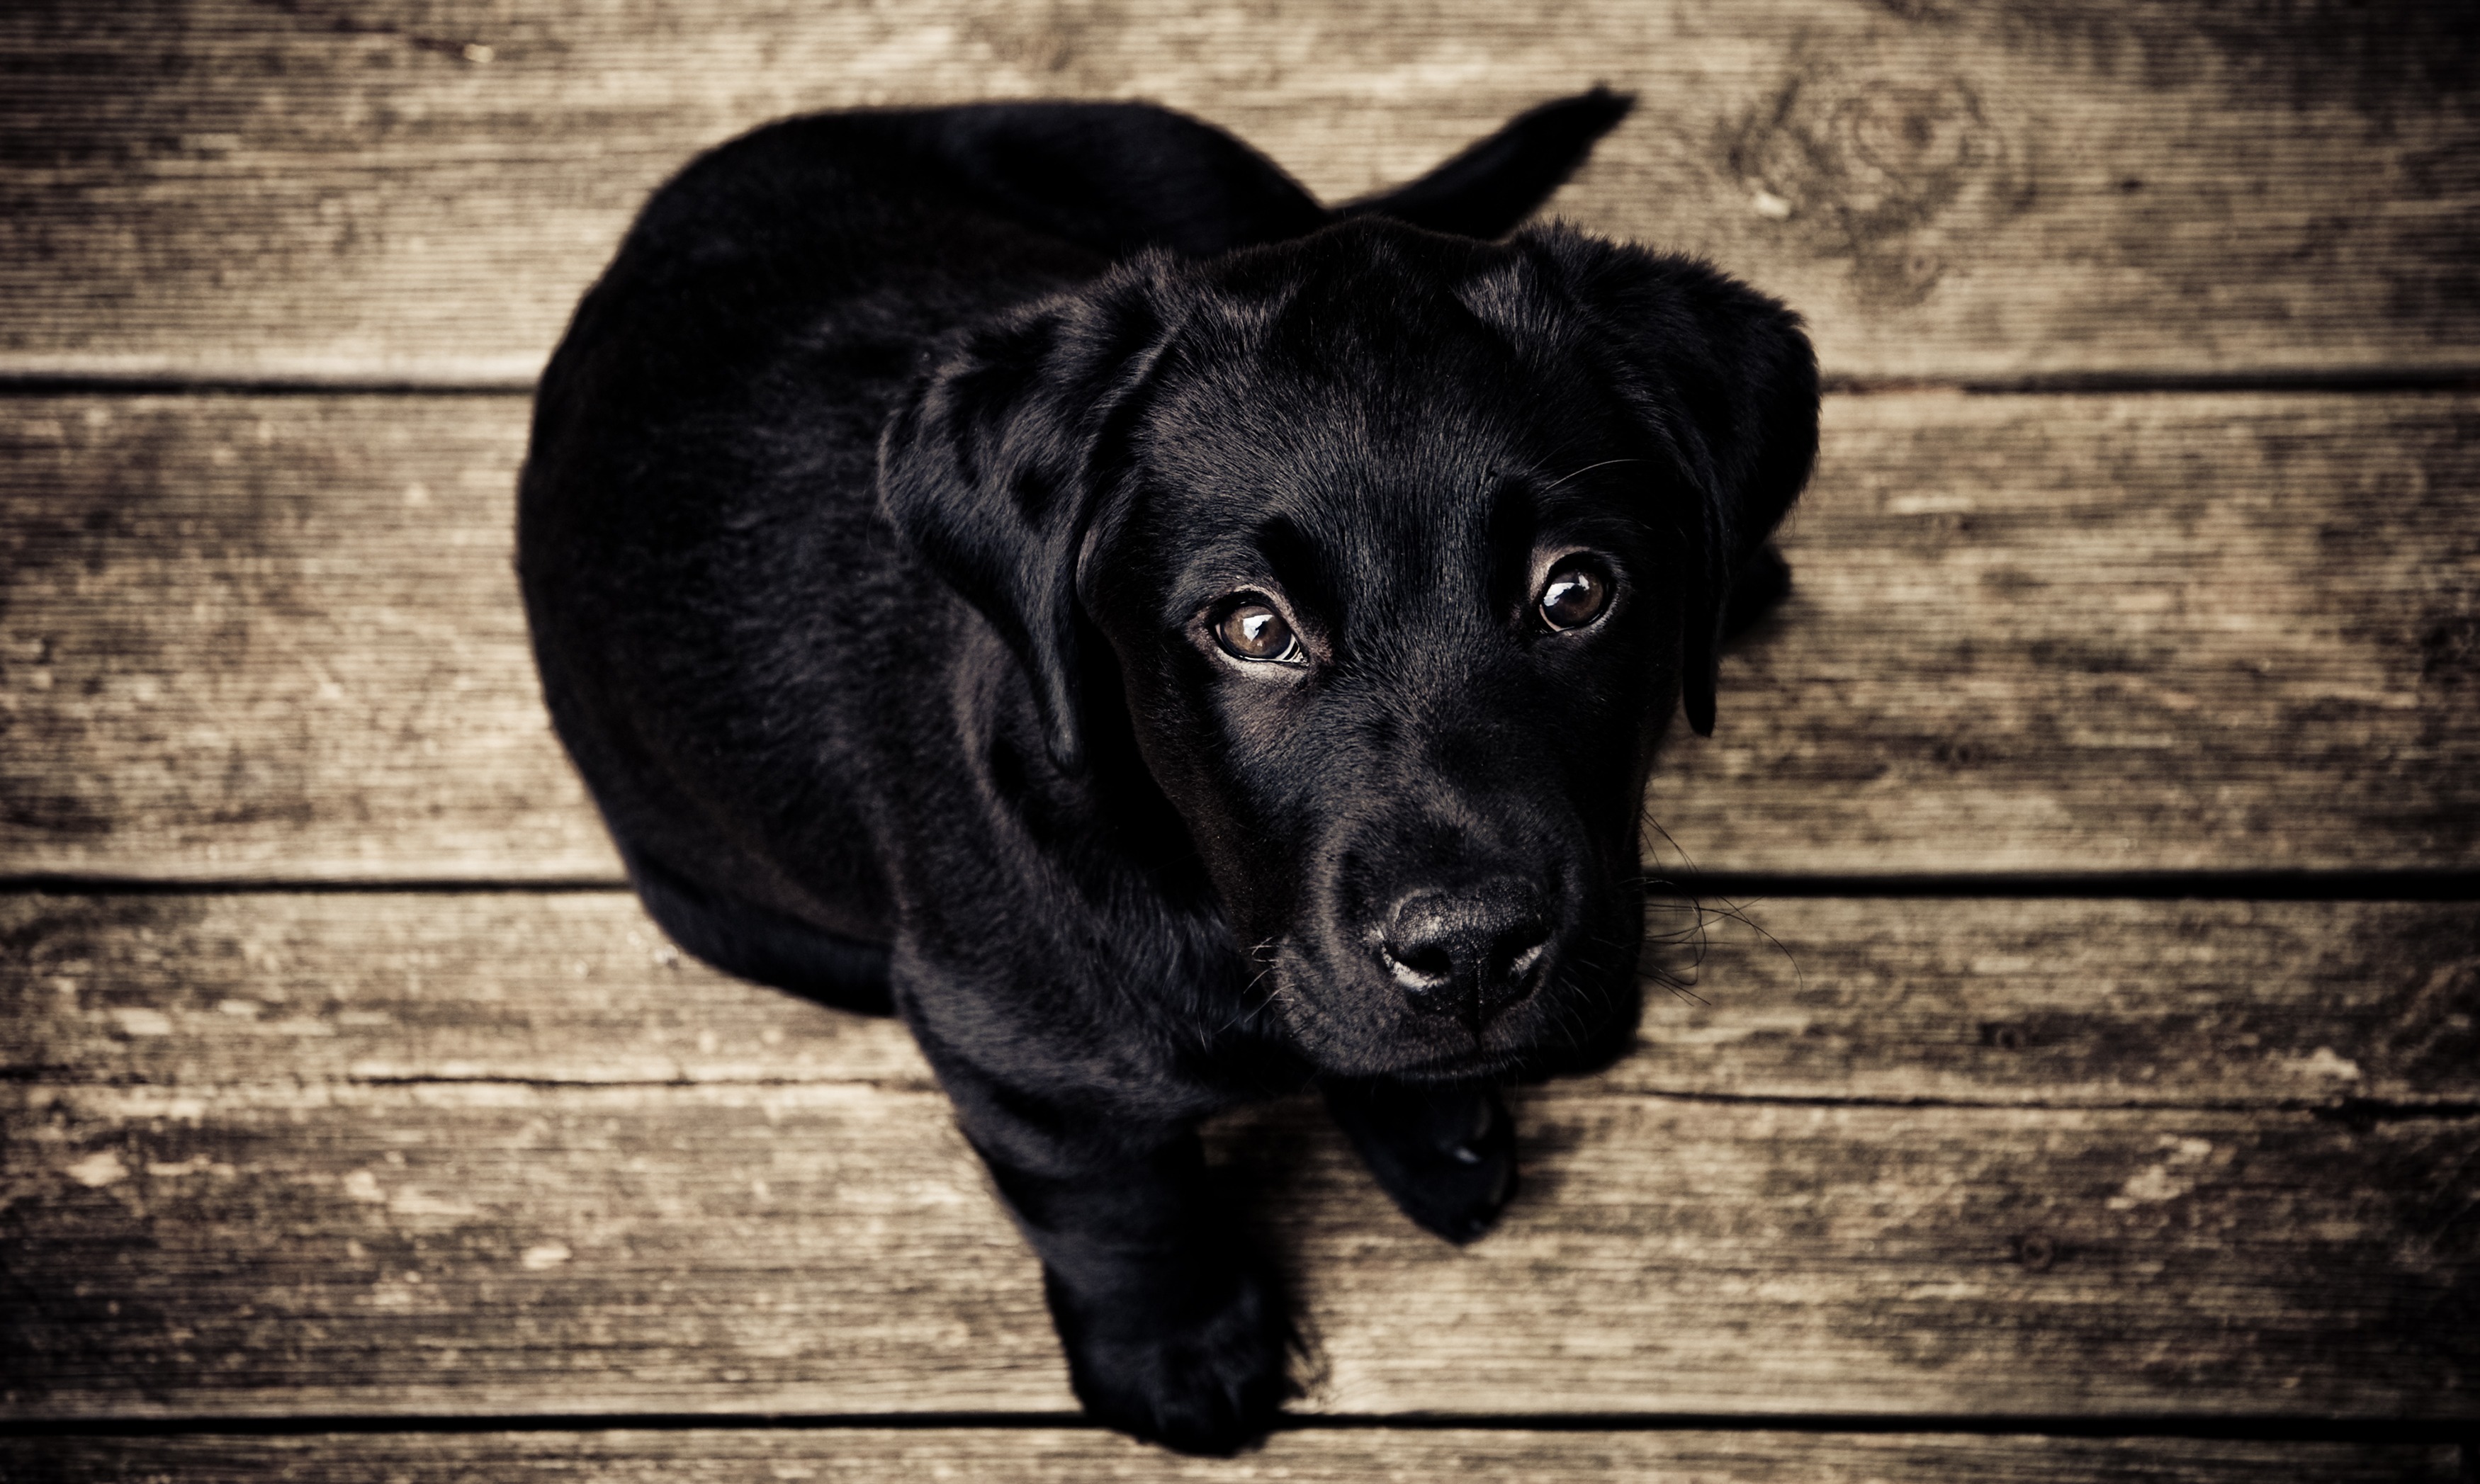 How to Trim Black Dog Nails Step by Step |